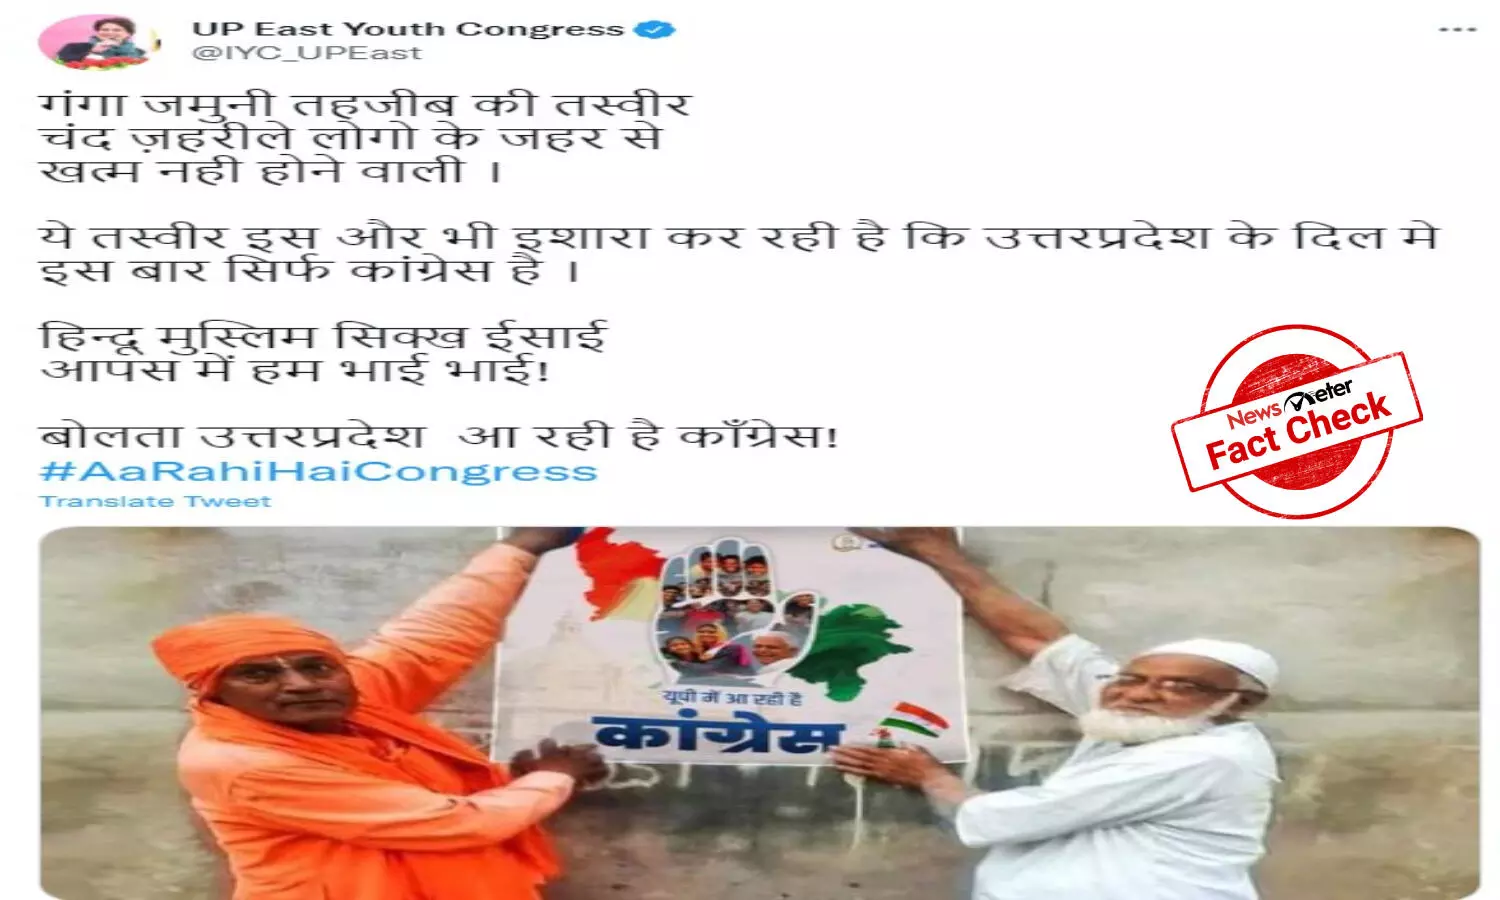 Congress edits TMC poster for UP election campaign